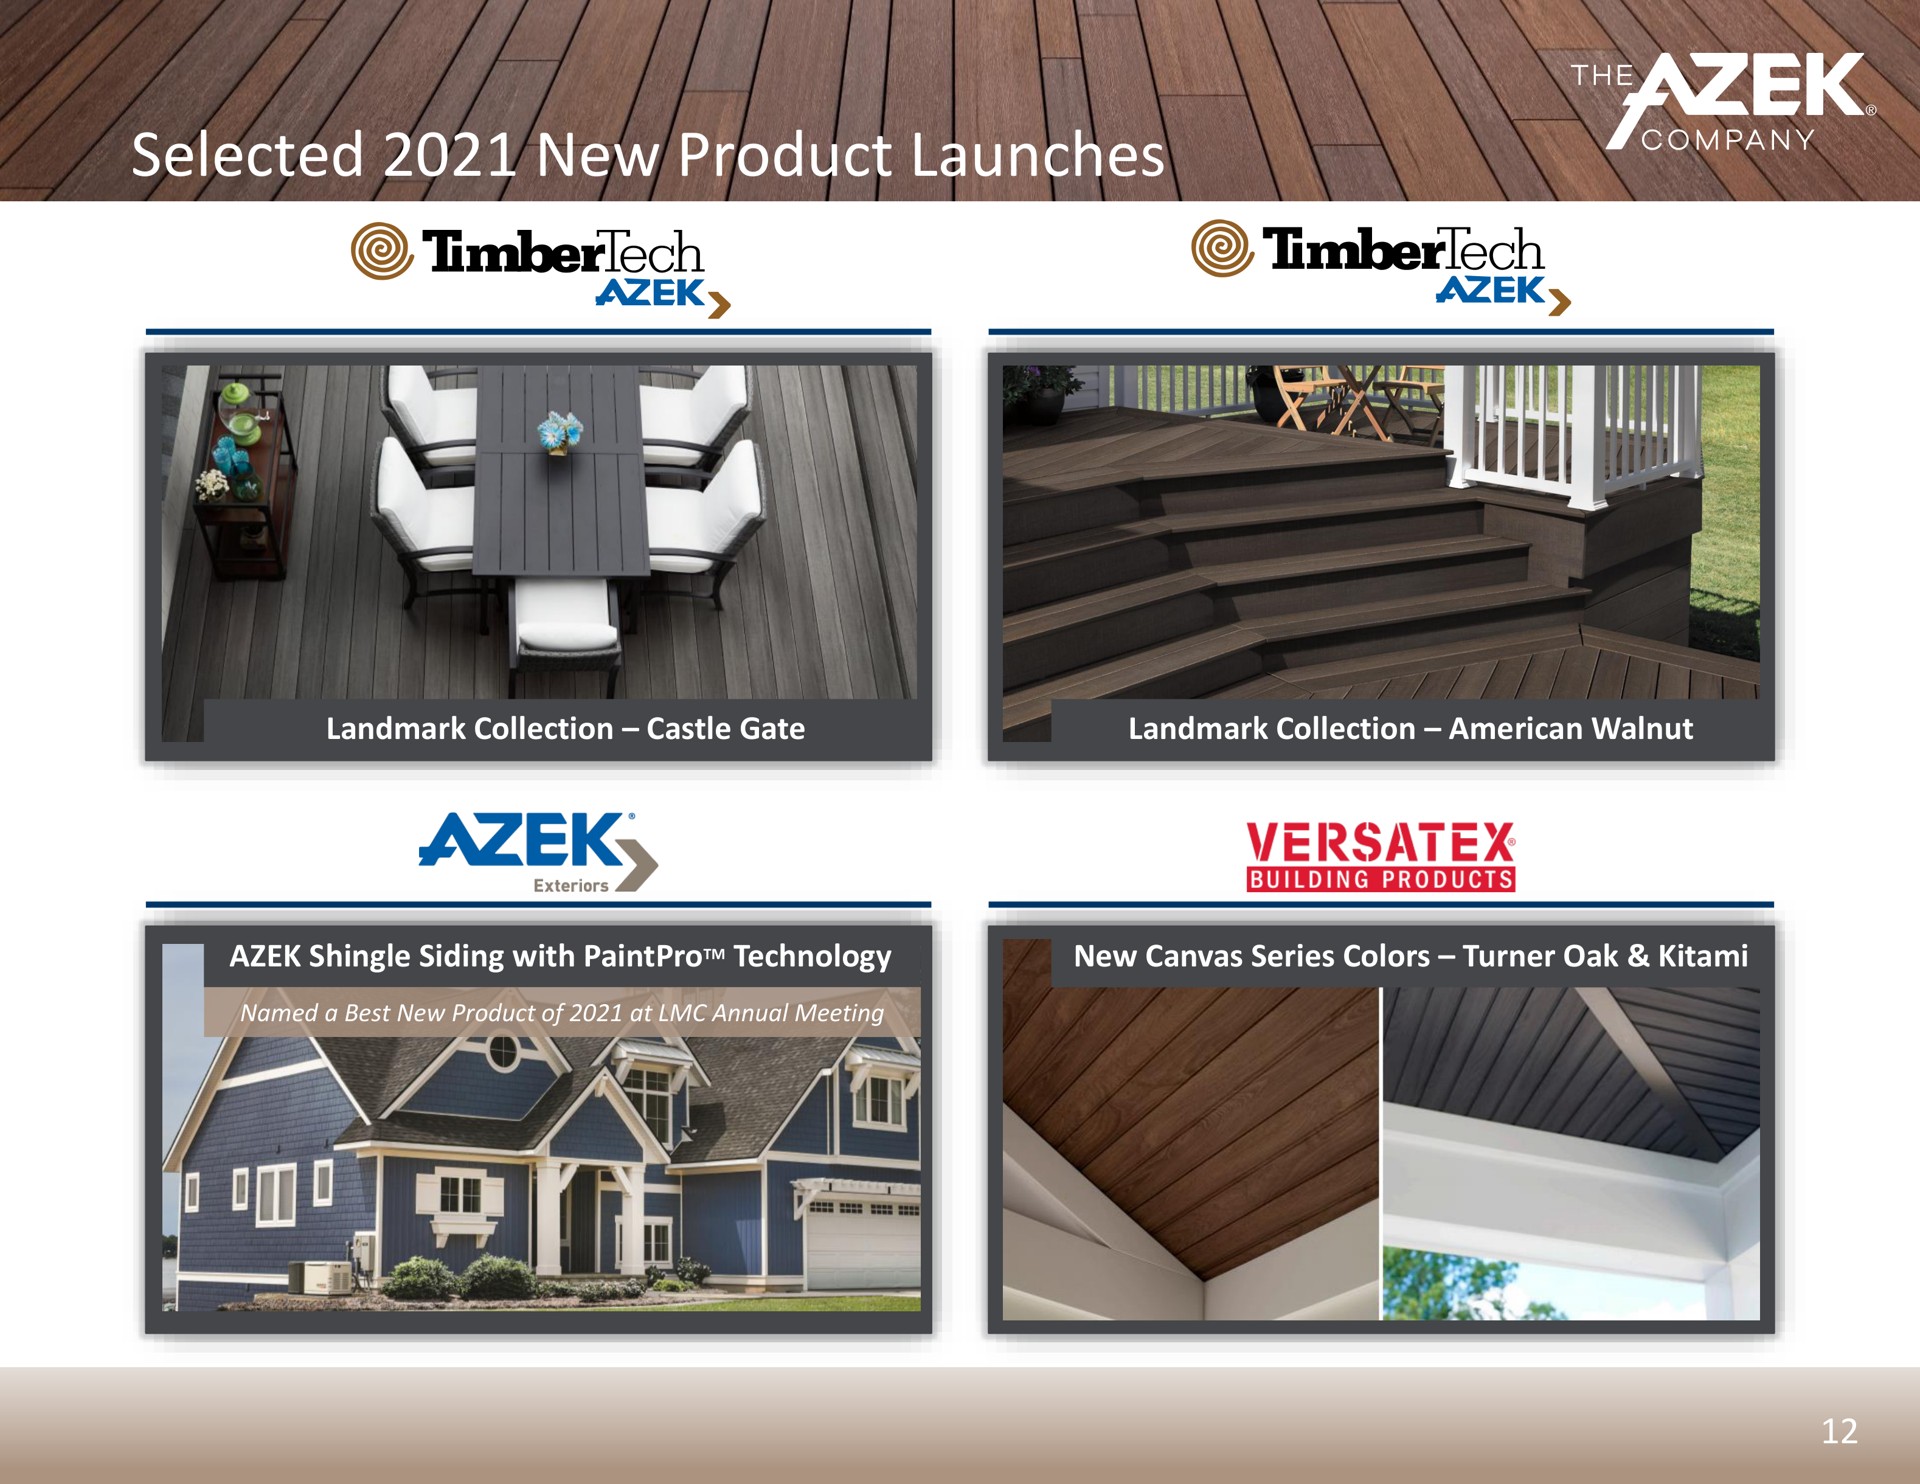 selected new product launches | Azek